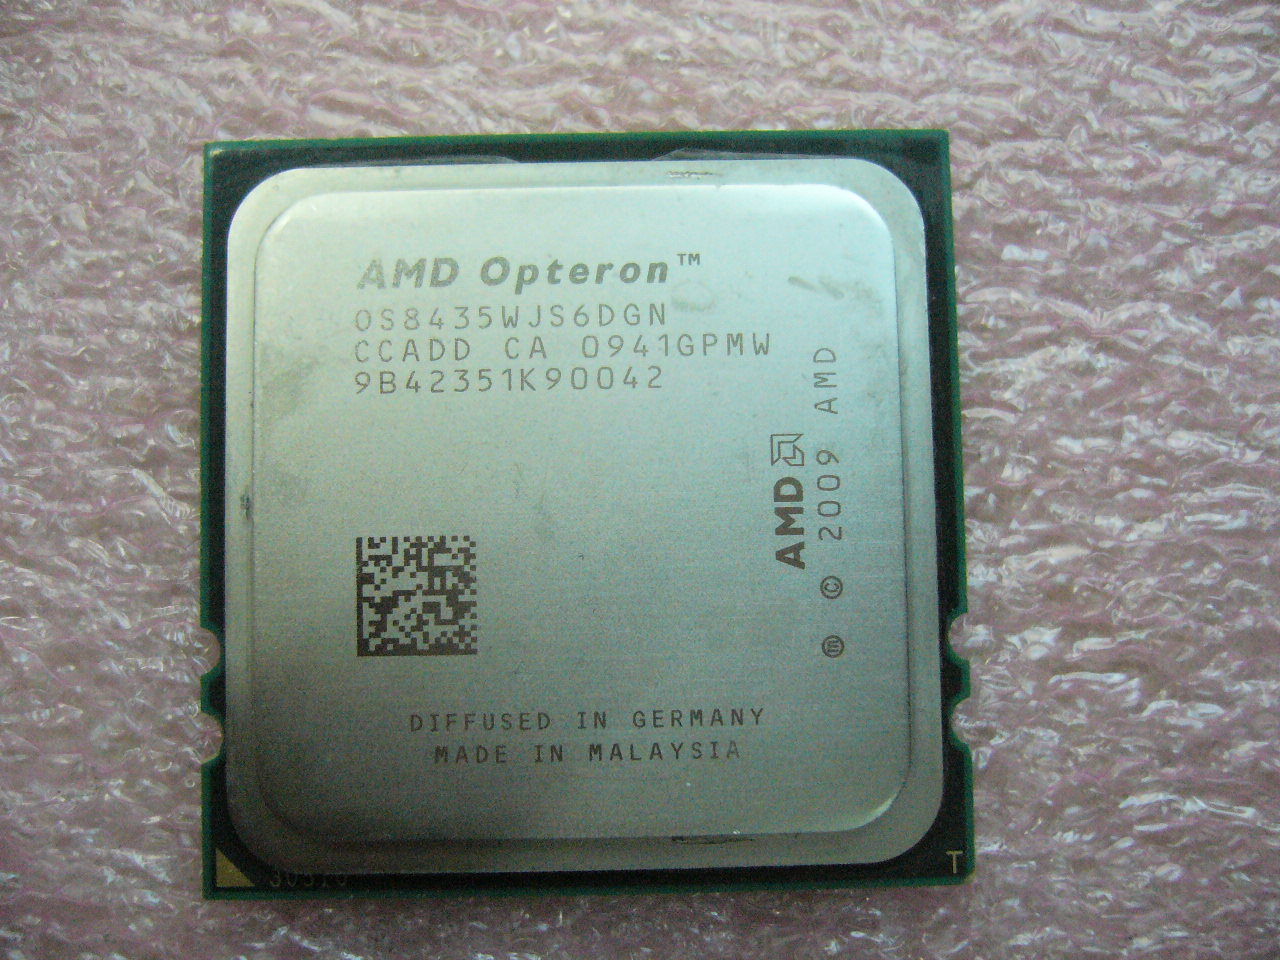 QTY 1x AMD Opteron 8435 2.6 GHz Six Core (OS8435WJS6DGN) CPU Socket F 1207 - Click Image to Close